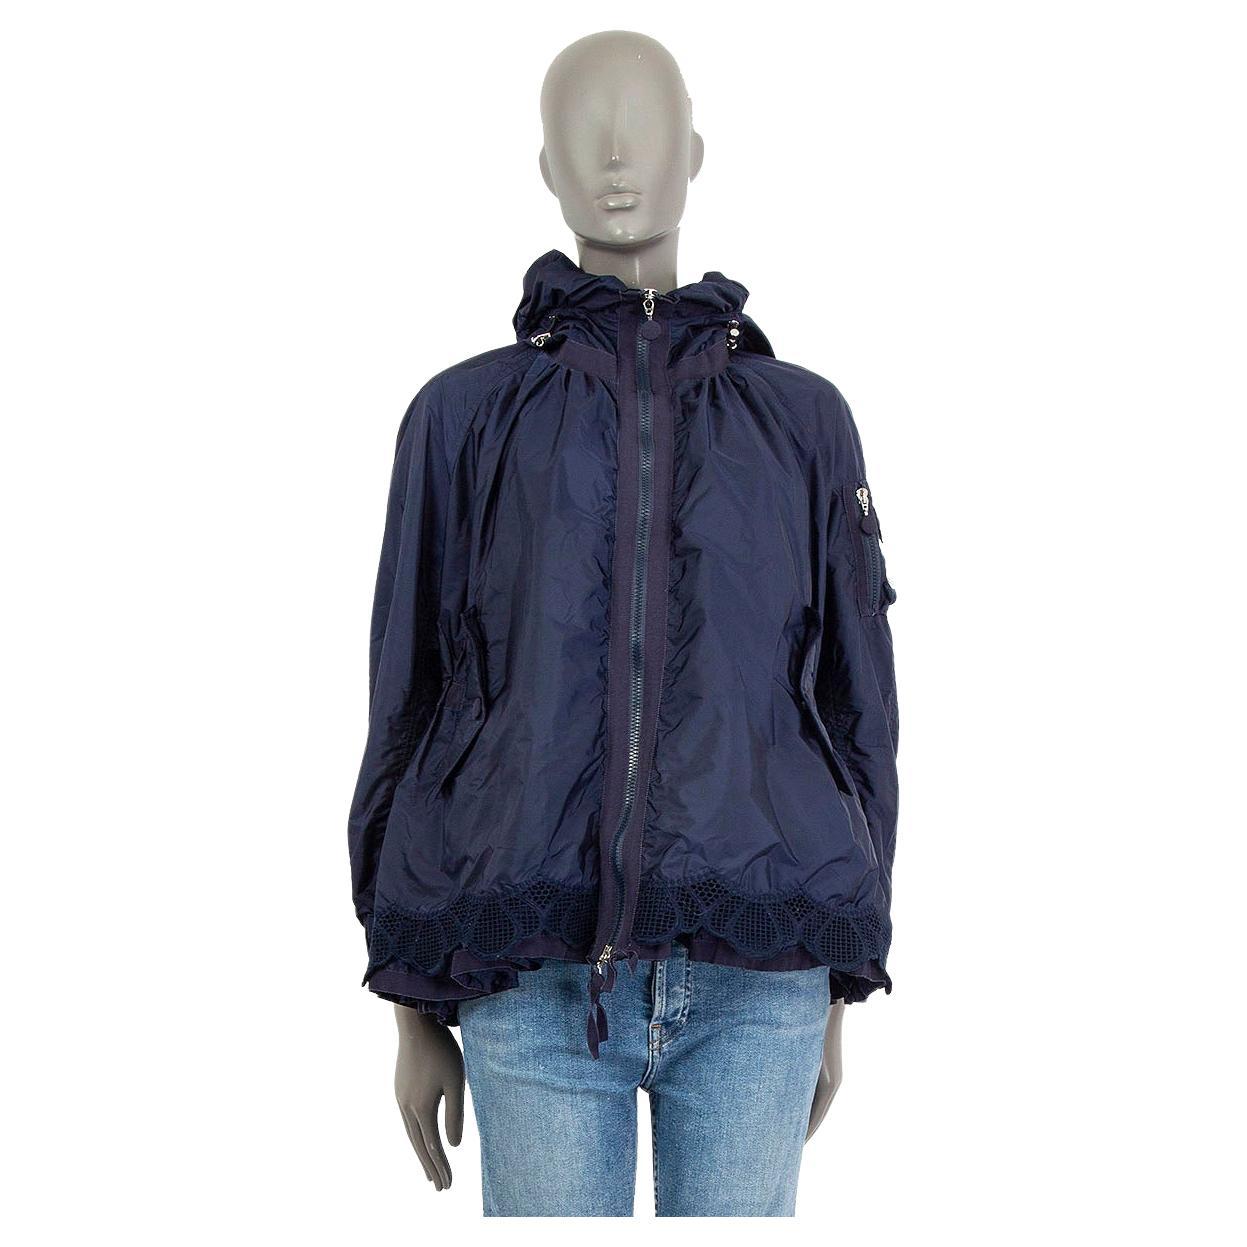 MONCLER blue BRODERIE ANGLAISE Windbreaker Jacket 2 M